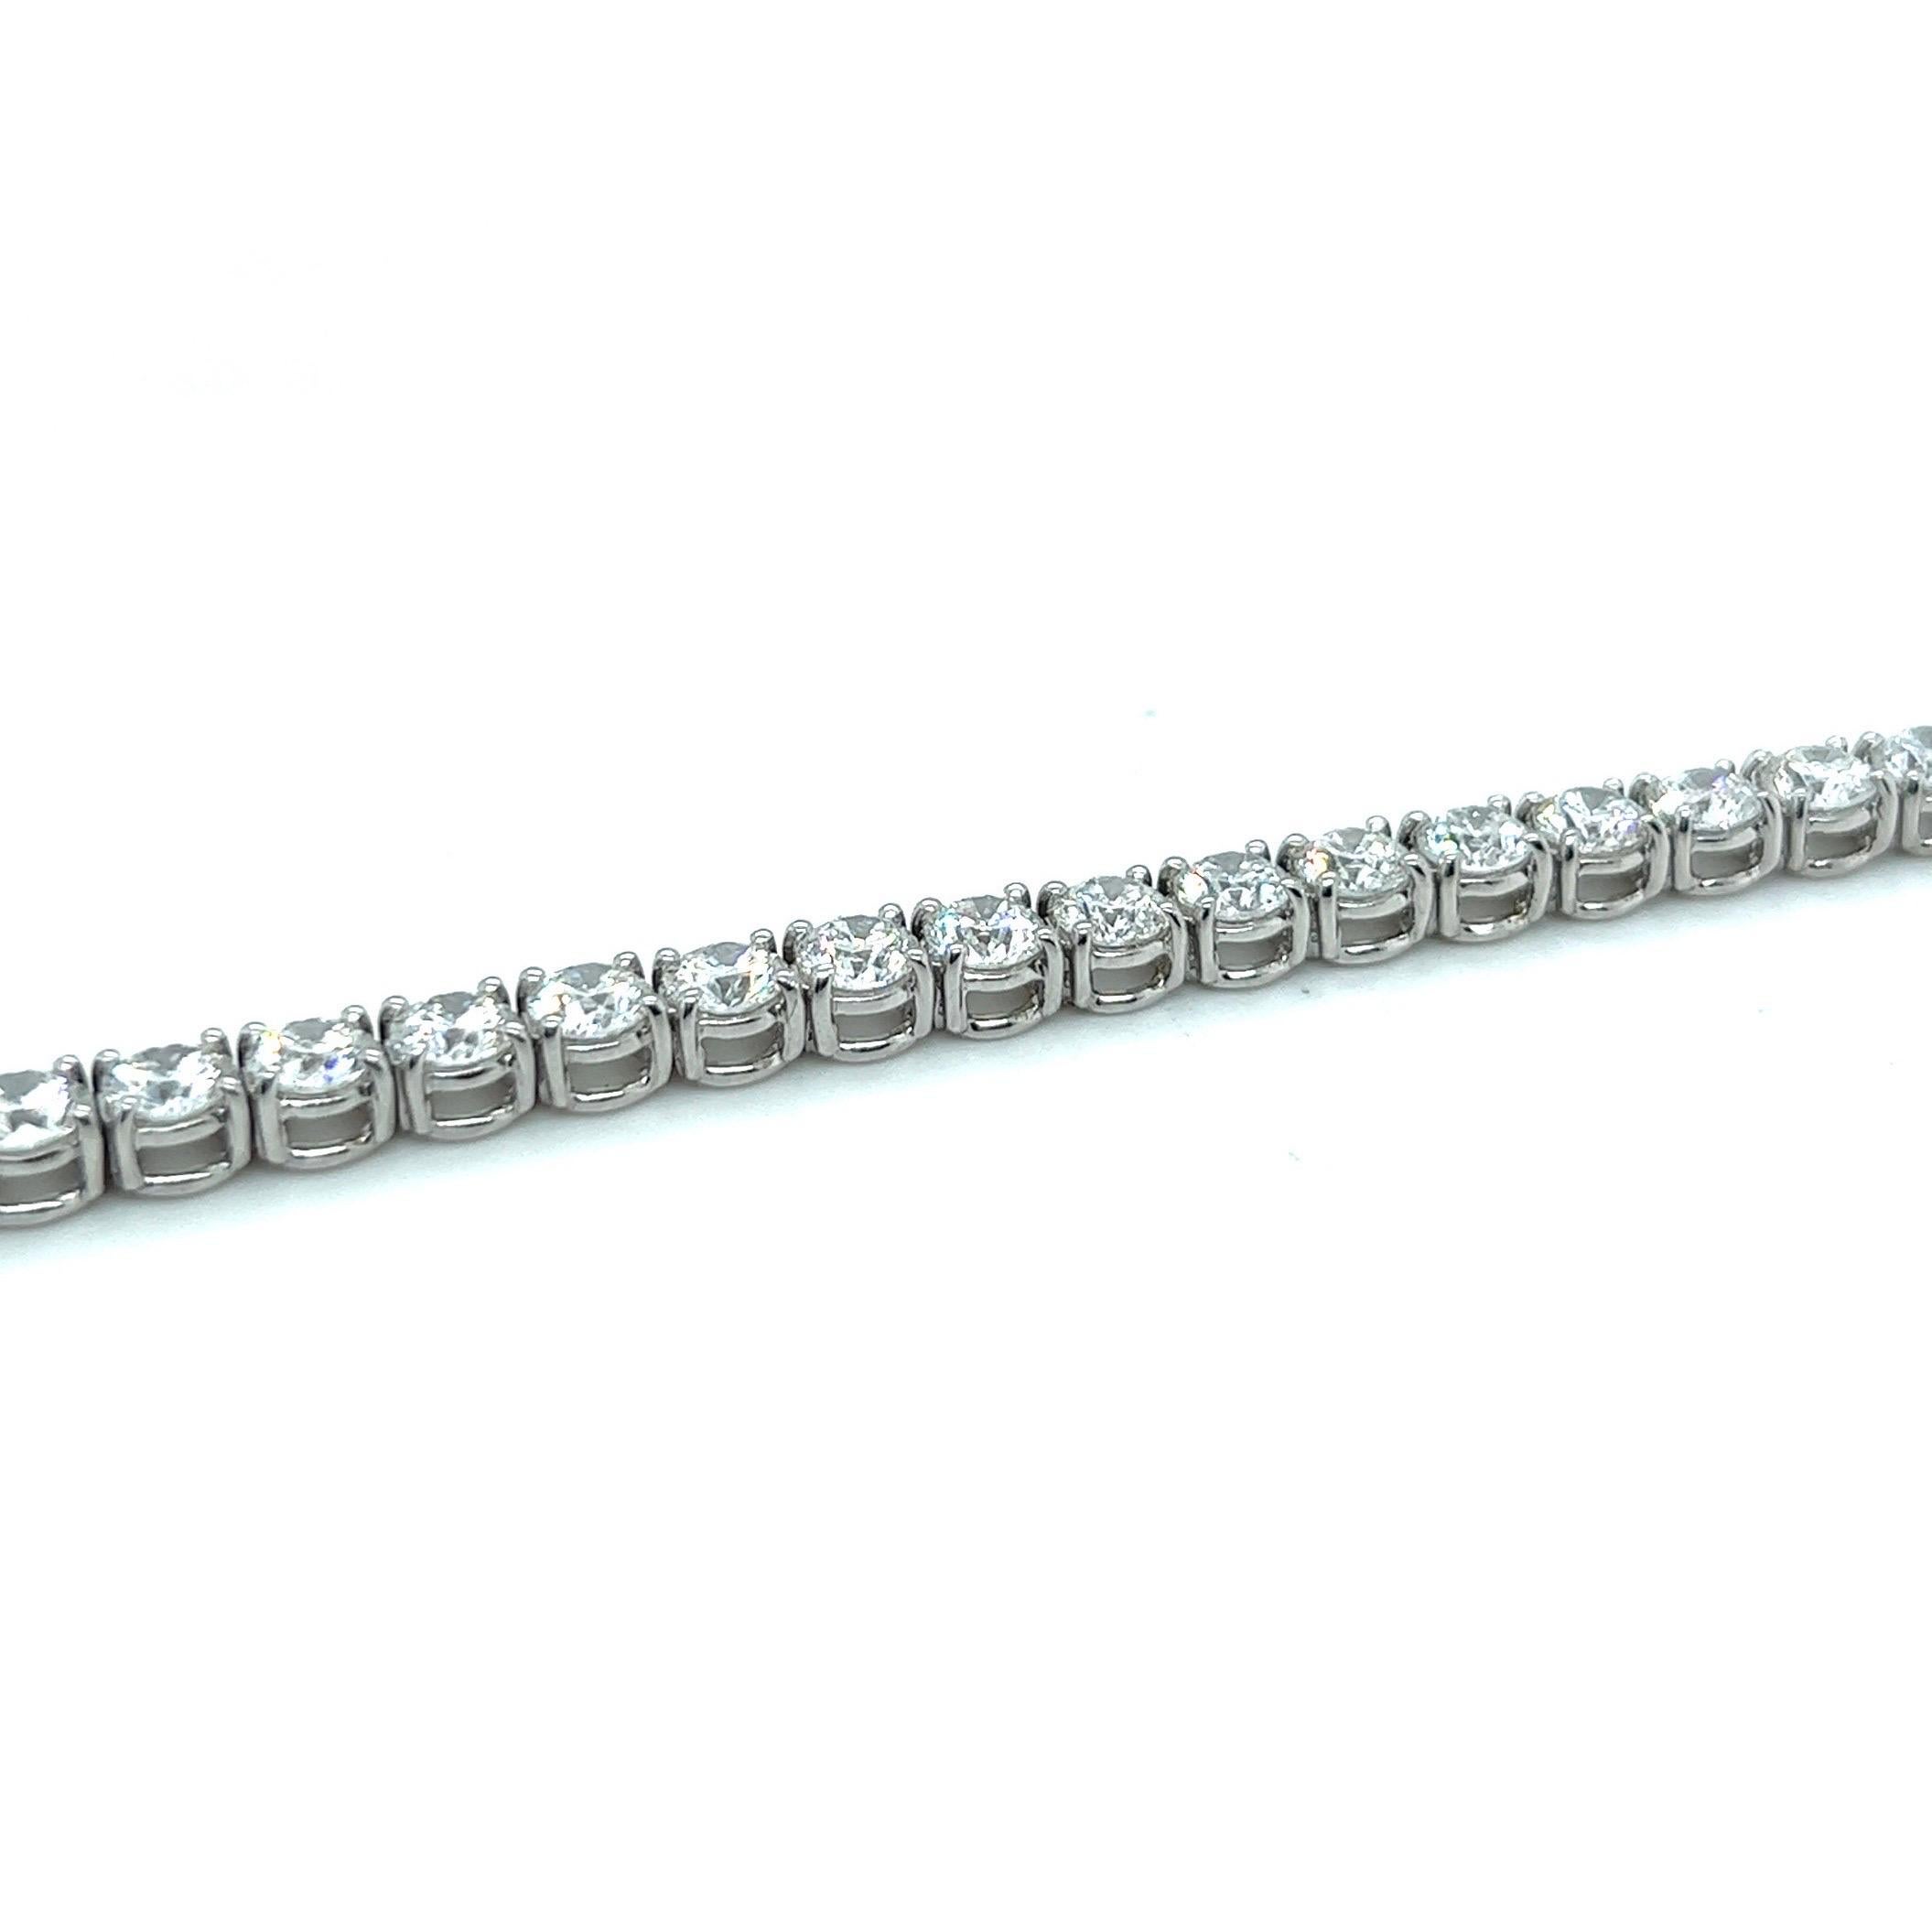 Elegant 9.69 carats brilliant-cut diamonds and 18 karat white gold tennis/rivière bracelet.

Crafted in 18 karat white gold and designed as a line of 42 high quality brilliant-cut diamonds, D - E / VS, totalling 9.69 carats. The bracelet closes with